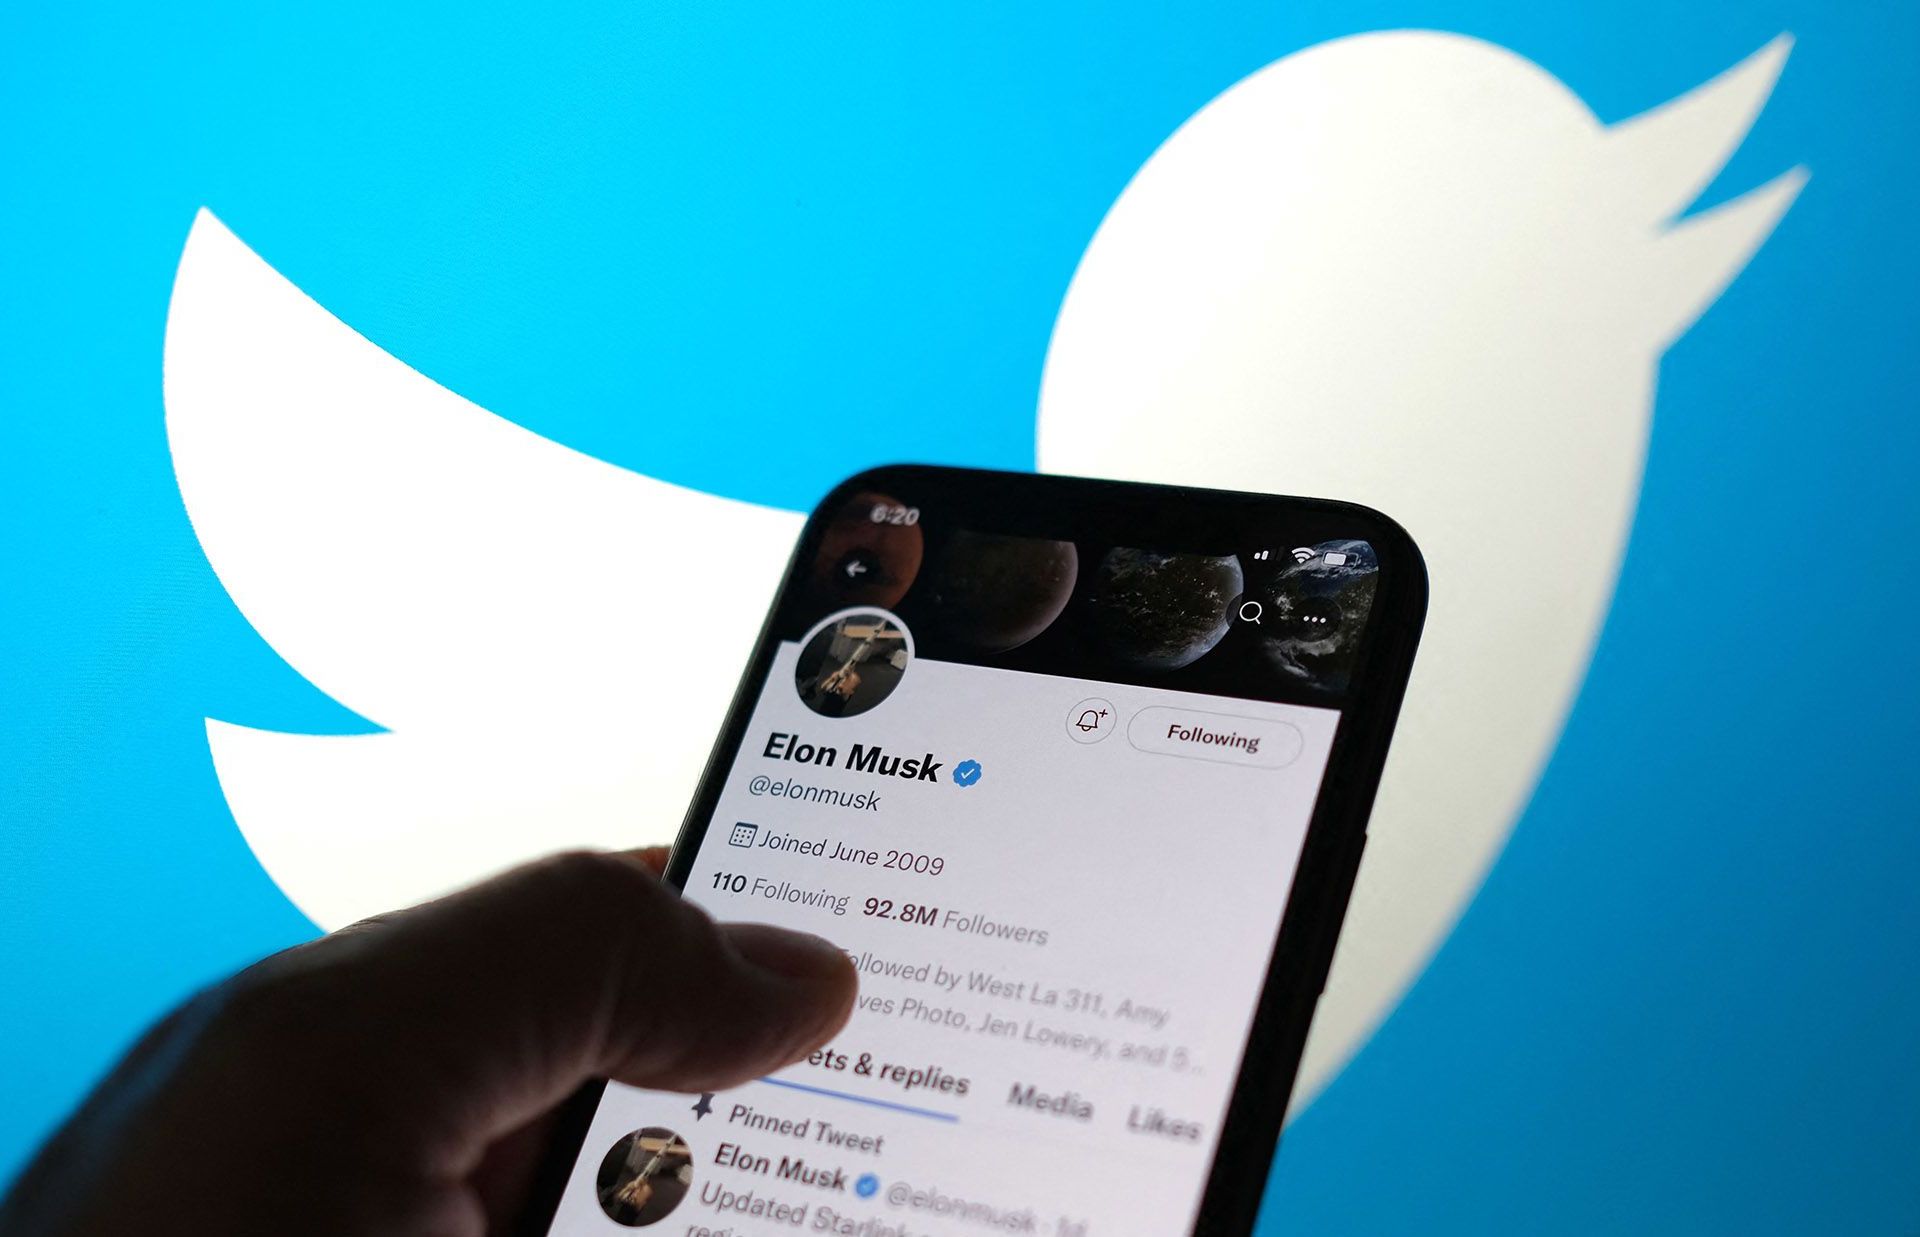 Twitter sees first win in case against Elon Musk